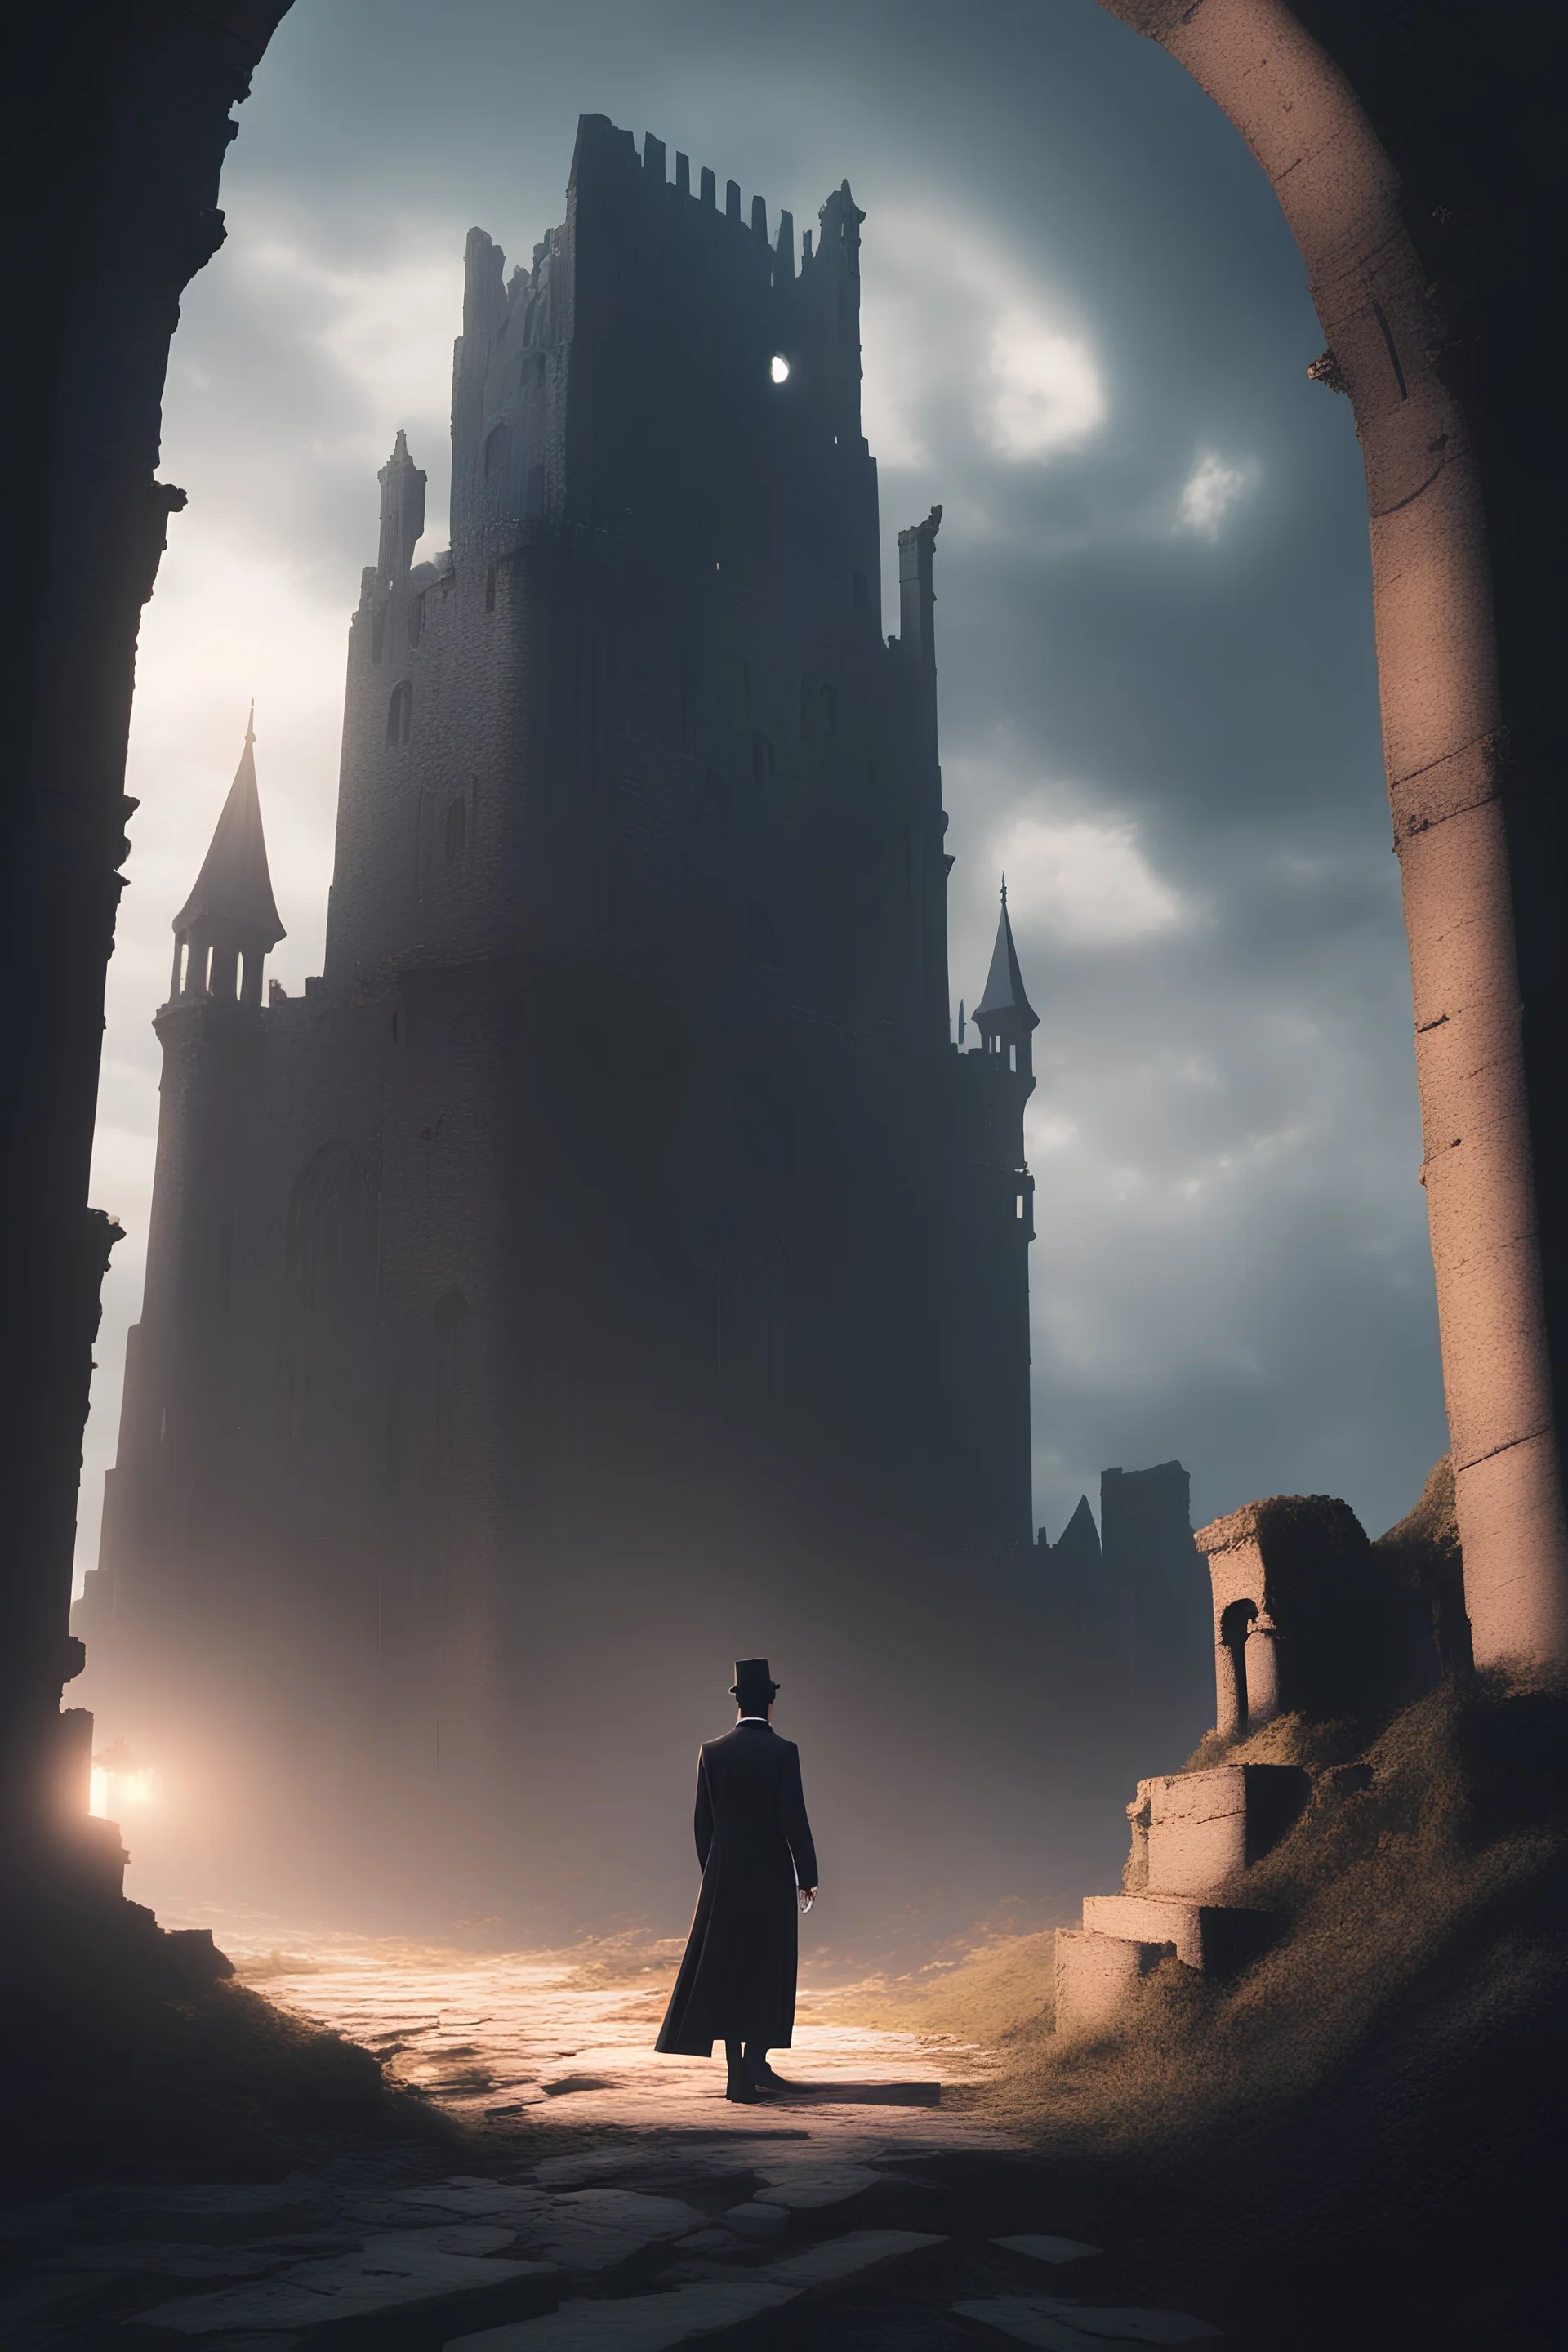 A youthful magician approaches a lonely ruined tower, dressed in formal wear, cinematic lighting, ray tracing, ominous vibes